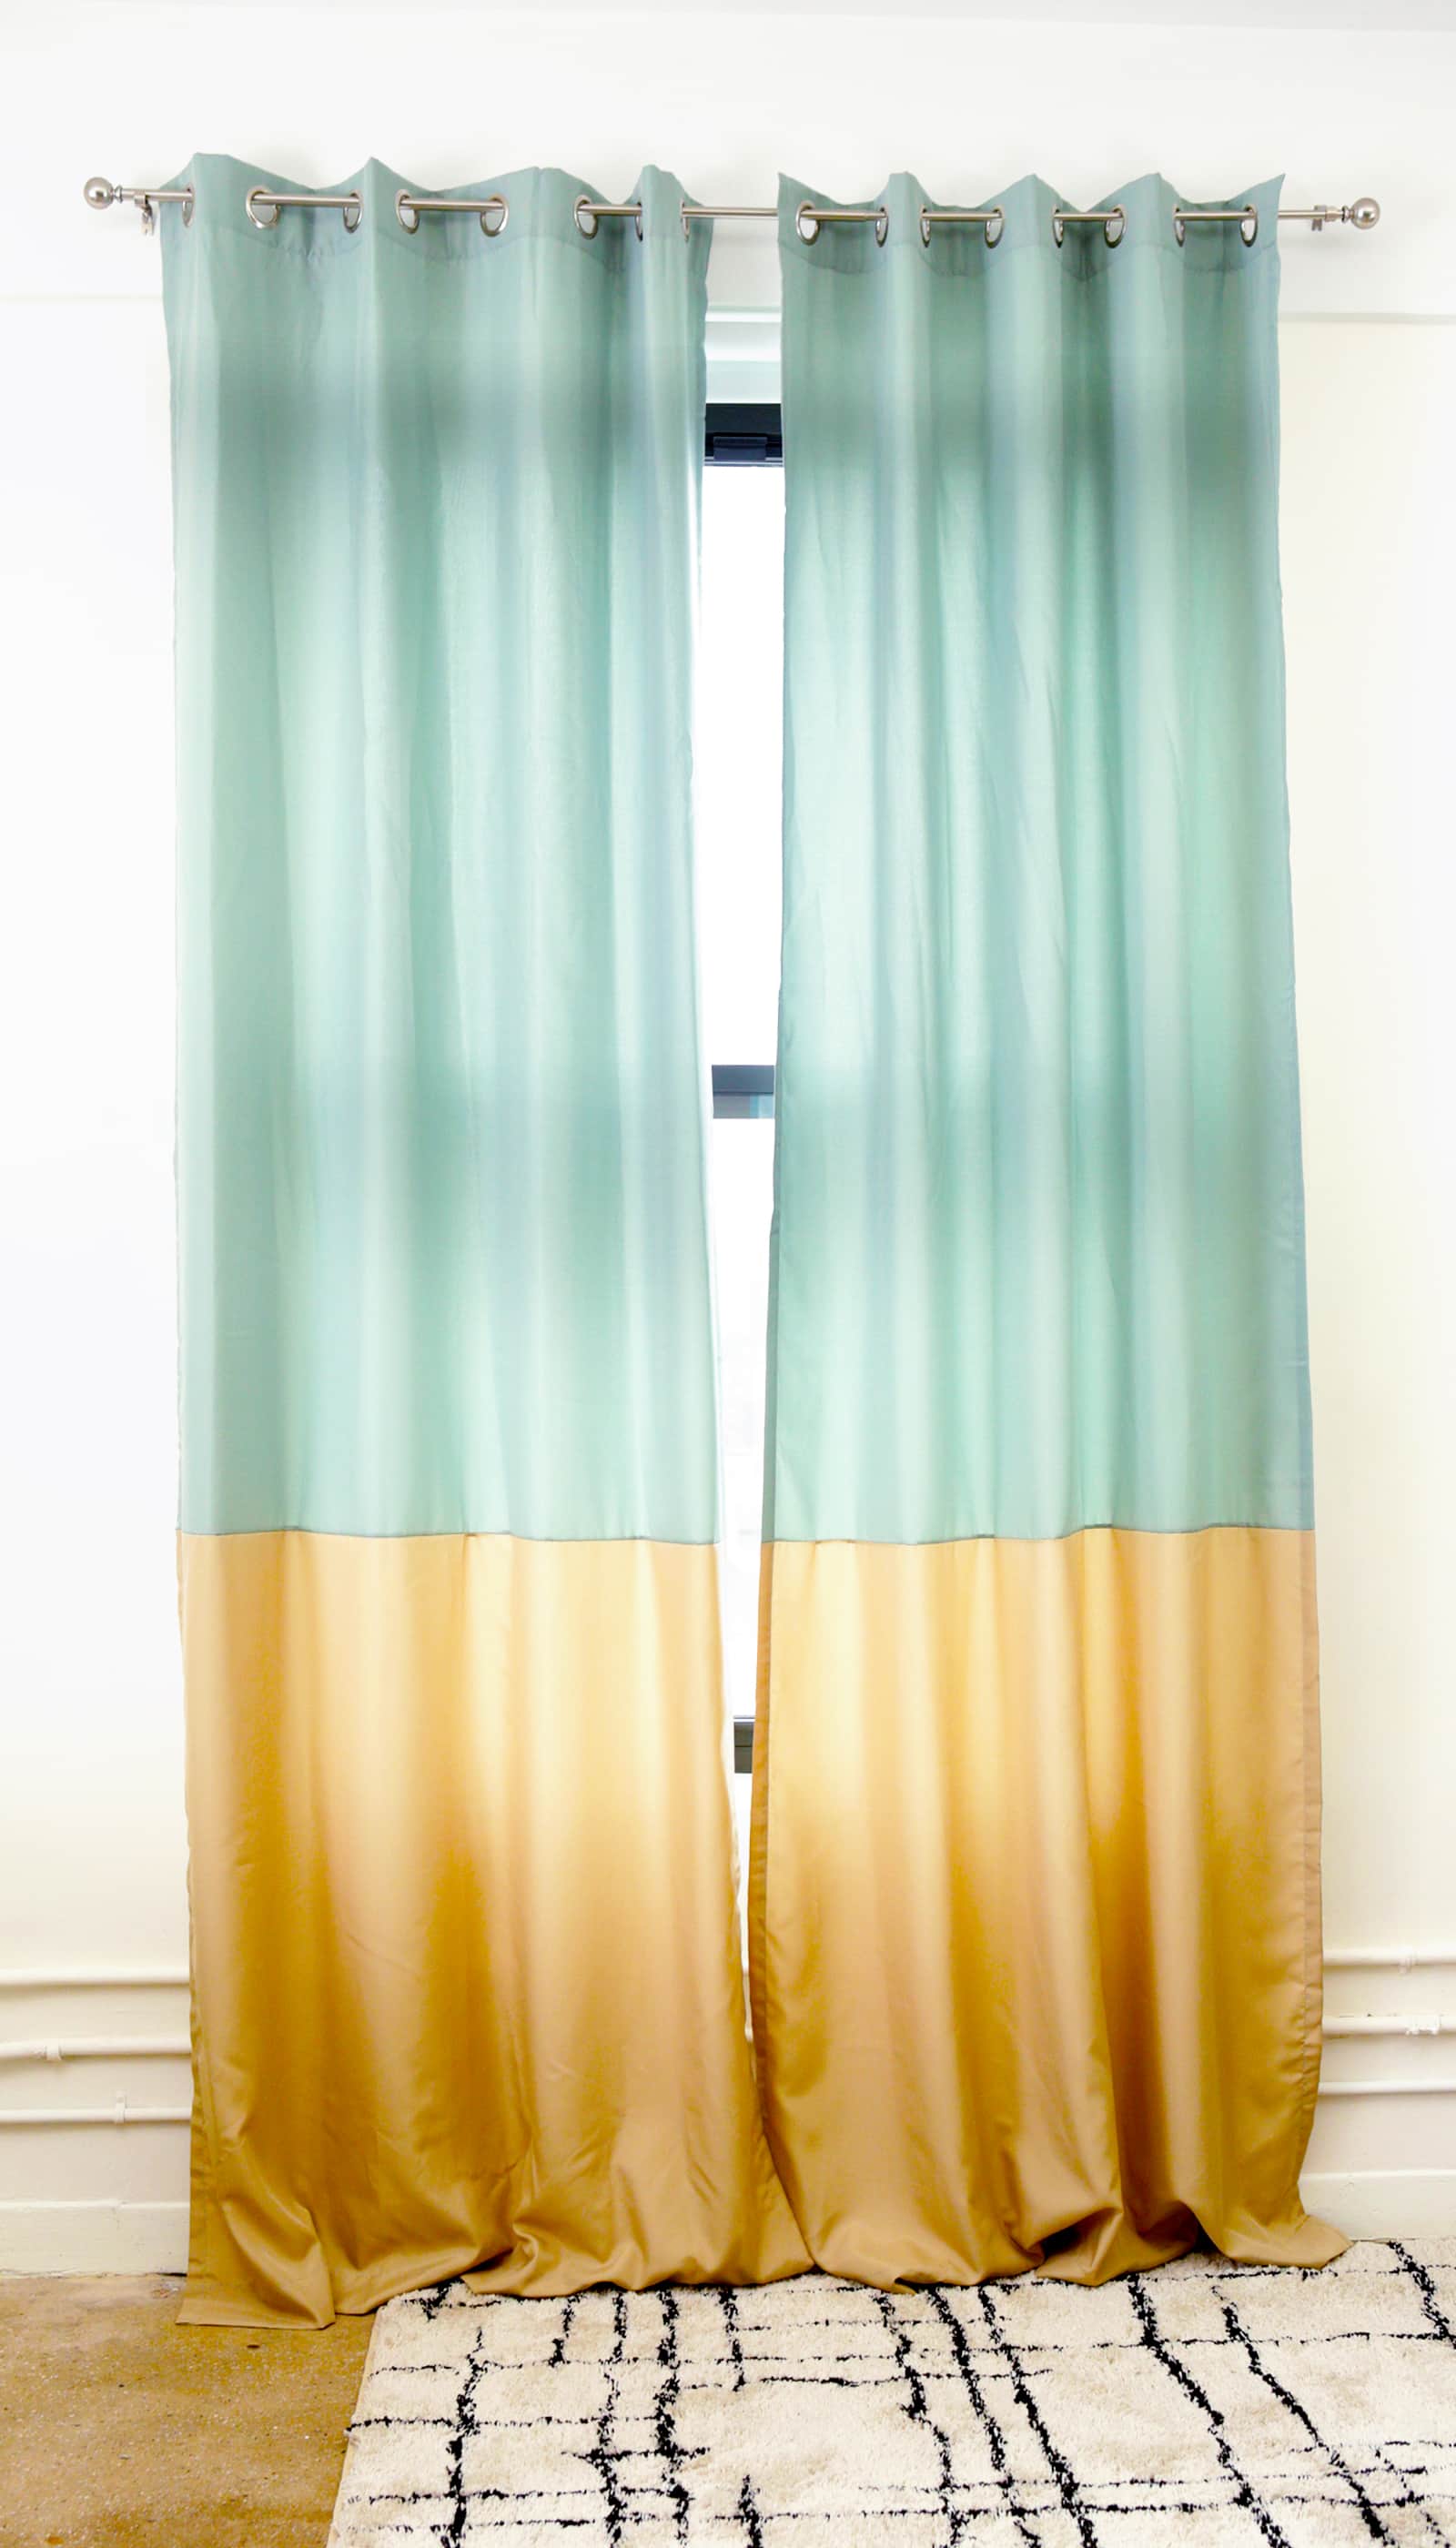 Get Accurate Measurements for Your Curtains